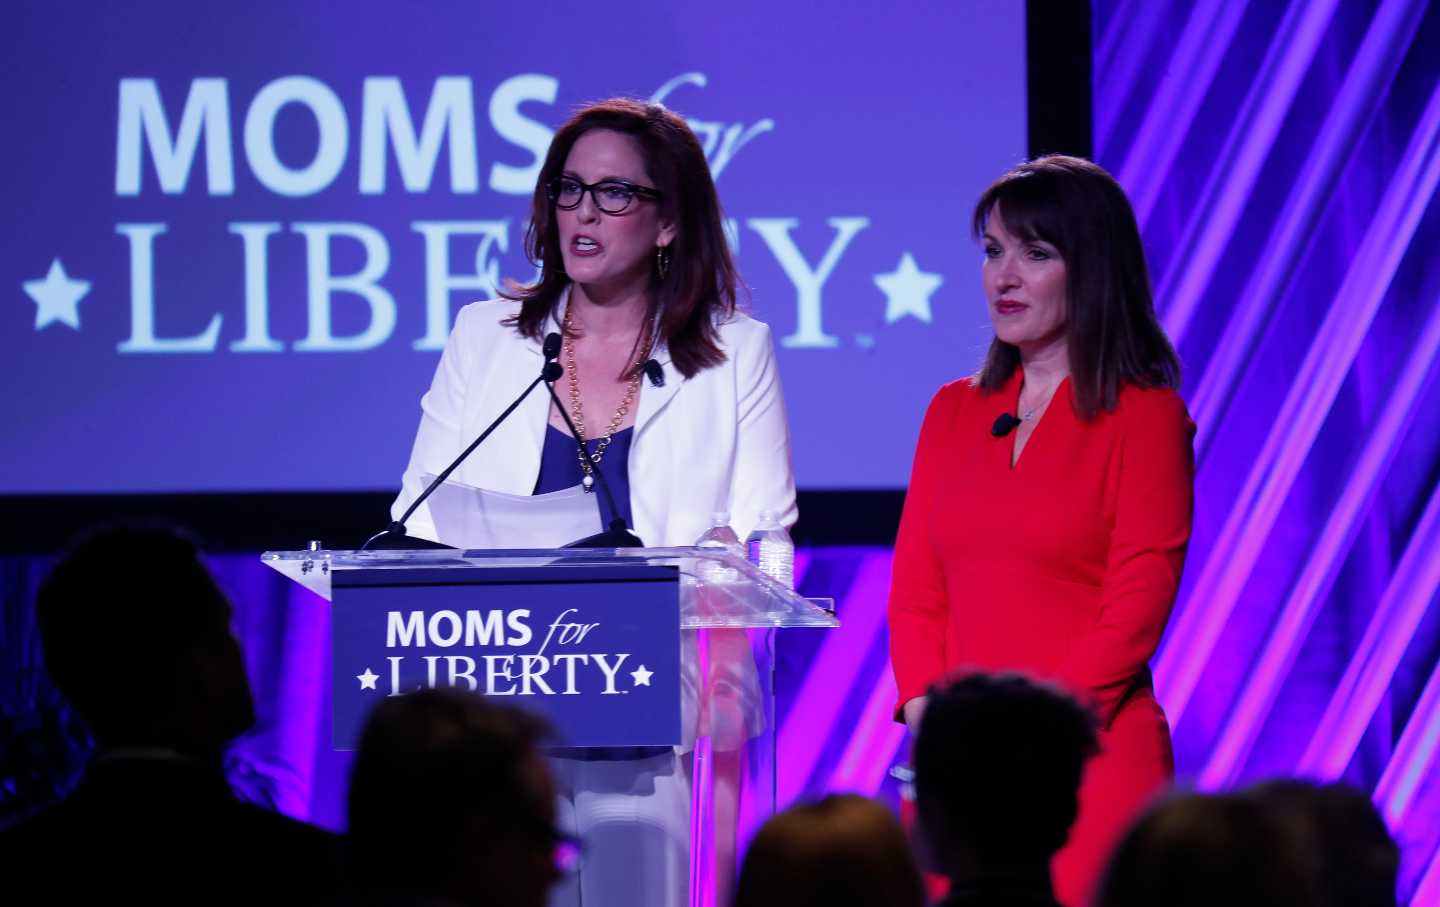 Moms for Liberty founders Tiffany Justice (L) and Tina Descovich at the Moms for Liberty Summit.